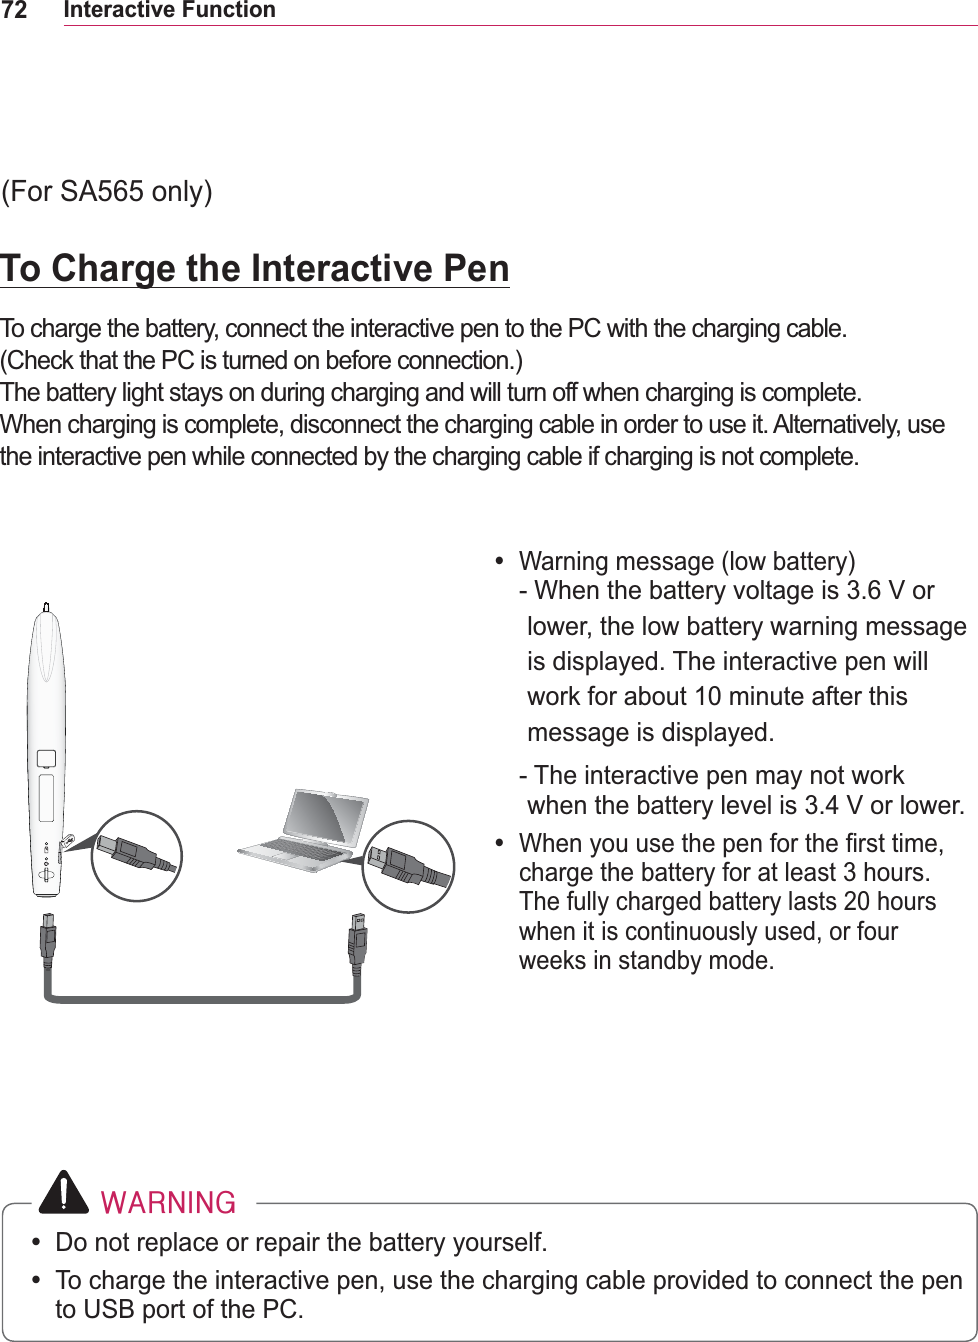 72Interactive Function #ZDUQLQJy Do not replace or repair the battery yourself.y To charge the interactive pen, use the charging cable provided to connect the pen to USB port of the PC.To Charge the Interactive PenTo charge the battery, connect the interactive pen to the PC with the charging cable. (Check that the PC is turned on before connection.)The battery light stays on during charging and will turn off when charging is complete.When charging is complete, disconnect the charging cable in order to use it. Alternatively, use the interactive pen while connected by the charging cable if charging is not complete.y Warning message (low battery) -  When the battery voltage is 3.6 V or lower, the low battery warning message is displayed. The interactive pen will message is displayed.-  The interactive pen may not work when the battery level is 3.4 V or lower.y When you use the pen for the first time, charge the battery for at least 3 hours. when it is continuously used, or four weeks in standby mode.(For SA565 only)